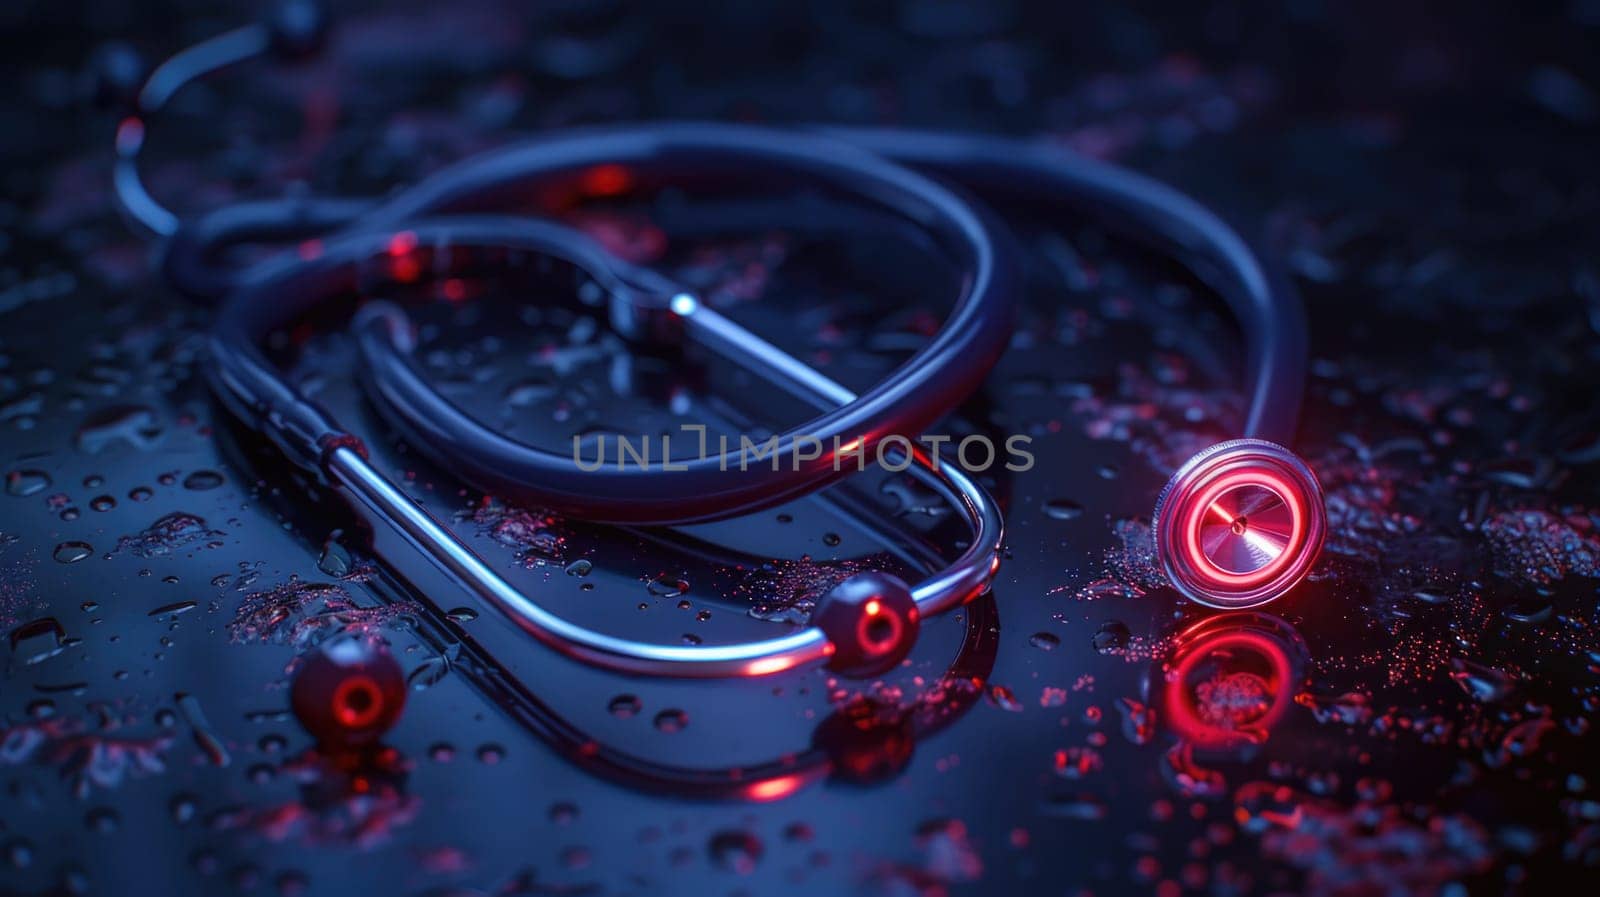 A stethoscope laying on top of a wet surface, reflecting light with droplets of water scattered around.